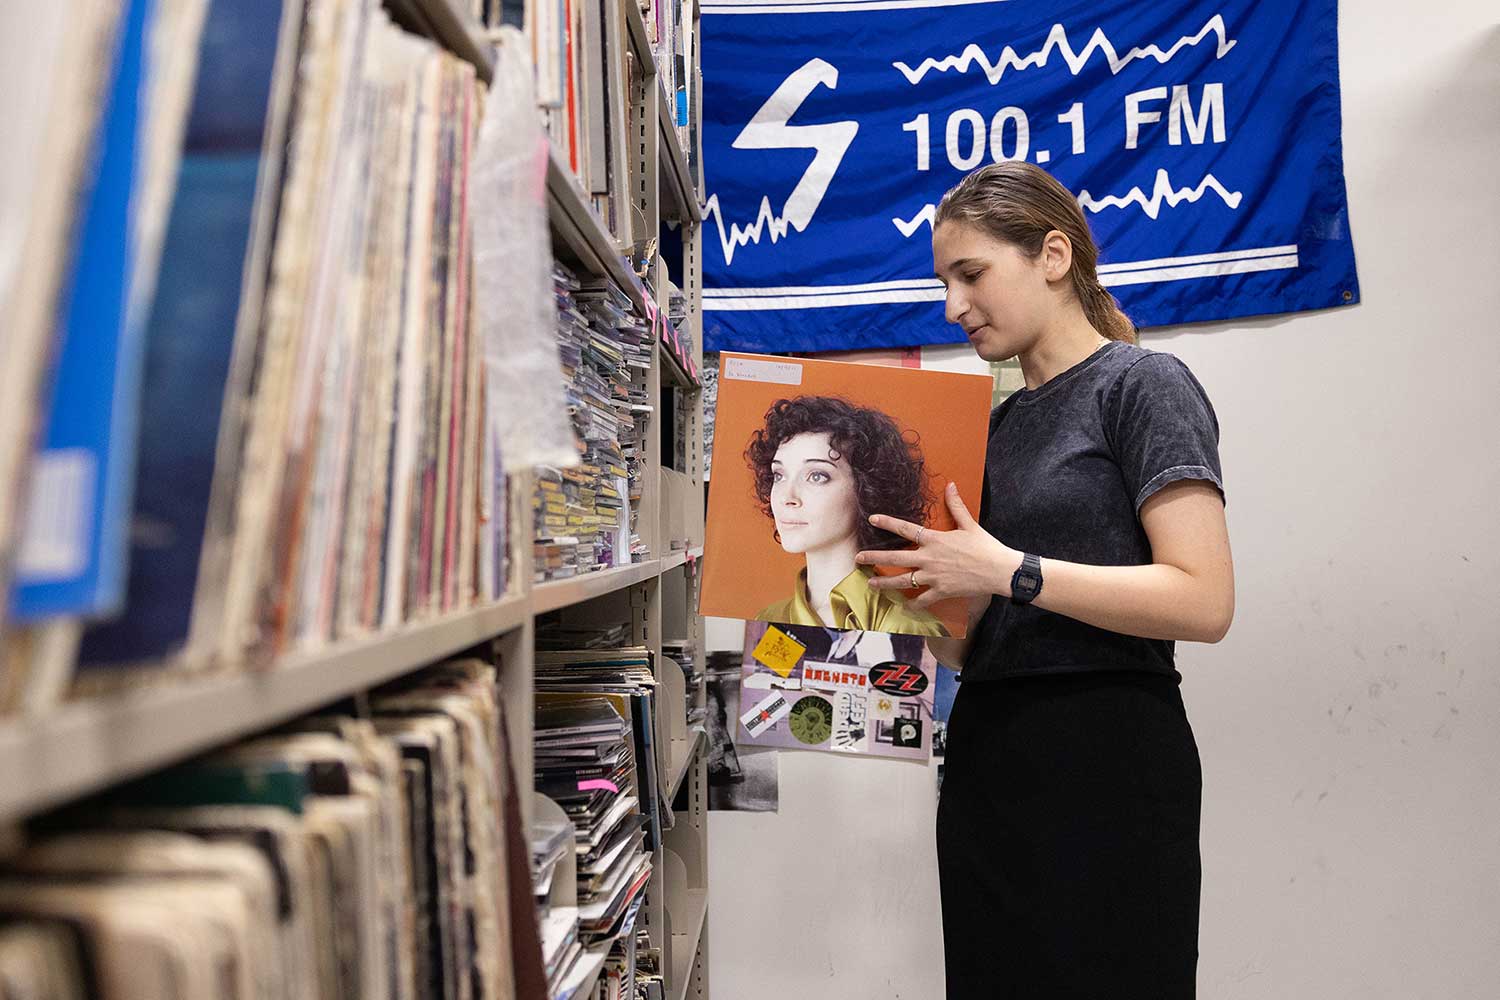 A student browses a shelf of records and CDs.